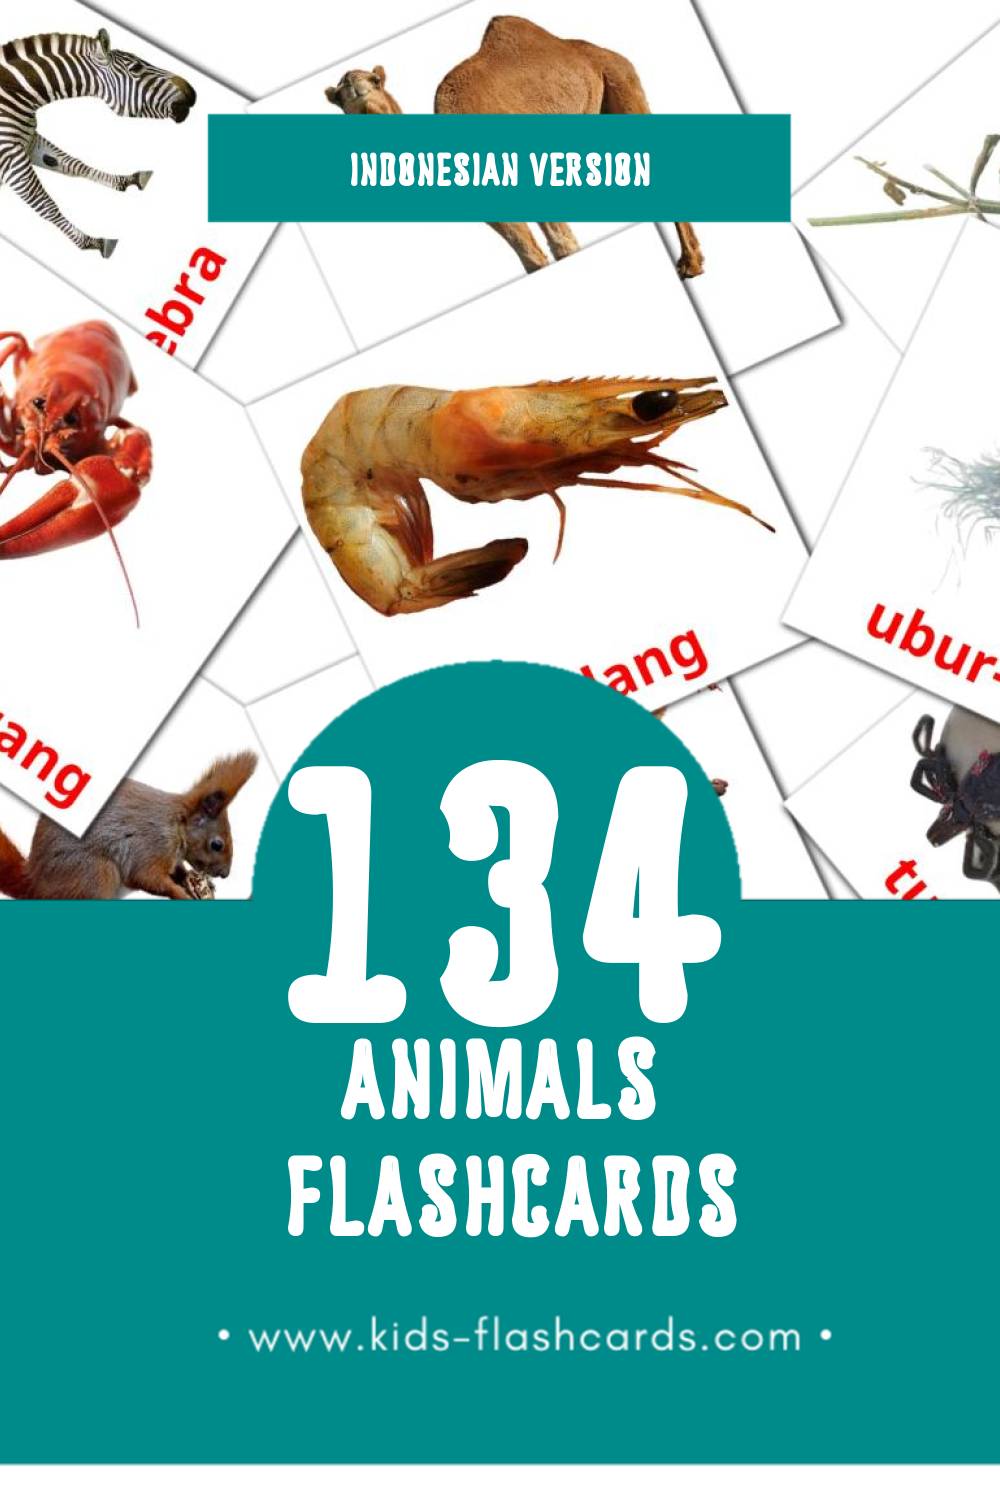 Visual Binatang Flashcards for Toddlers (134 cards in Indonesian)